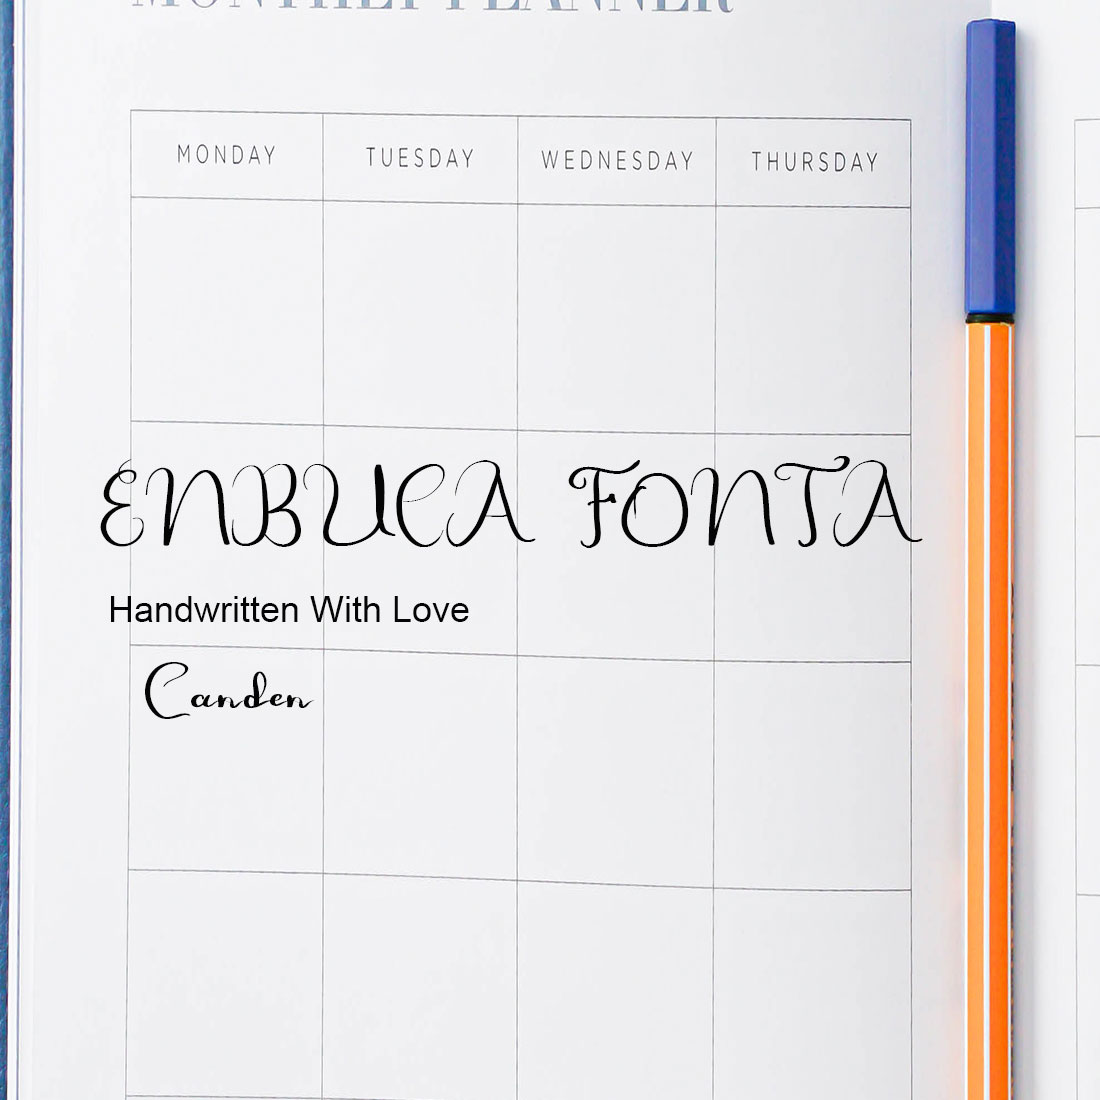 ENBUCA FONTA Written by Hand - Only $18 cover image.